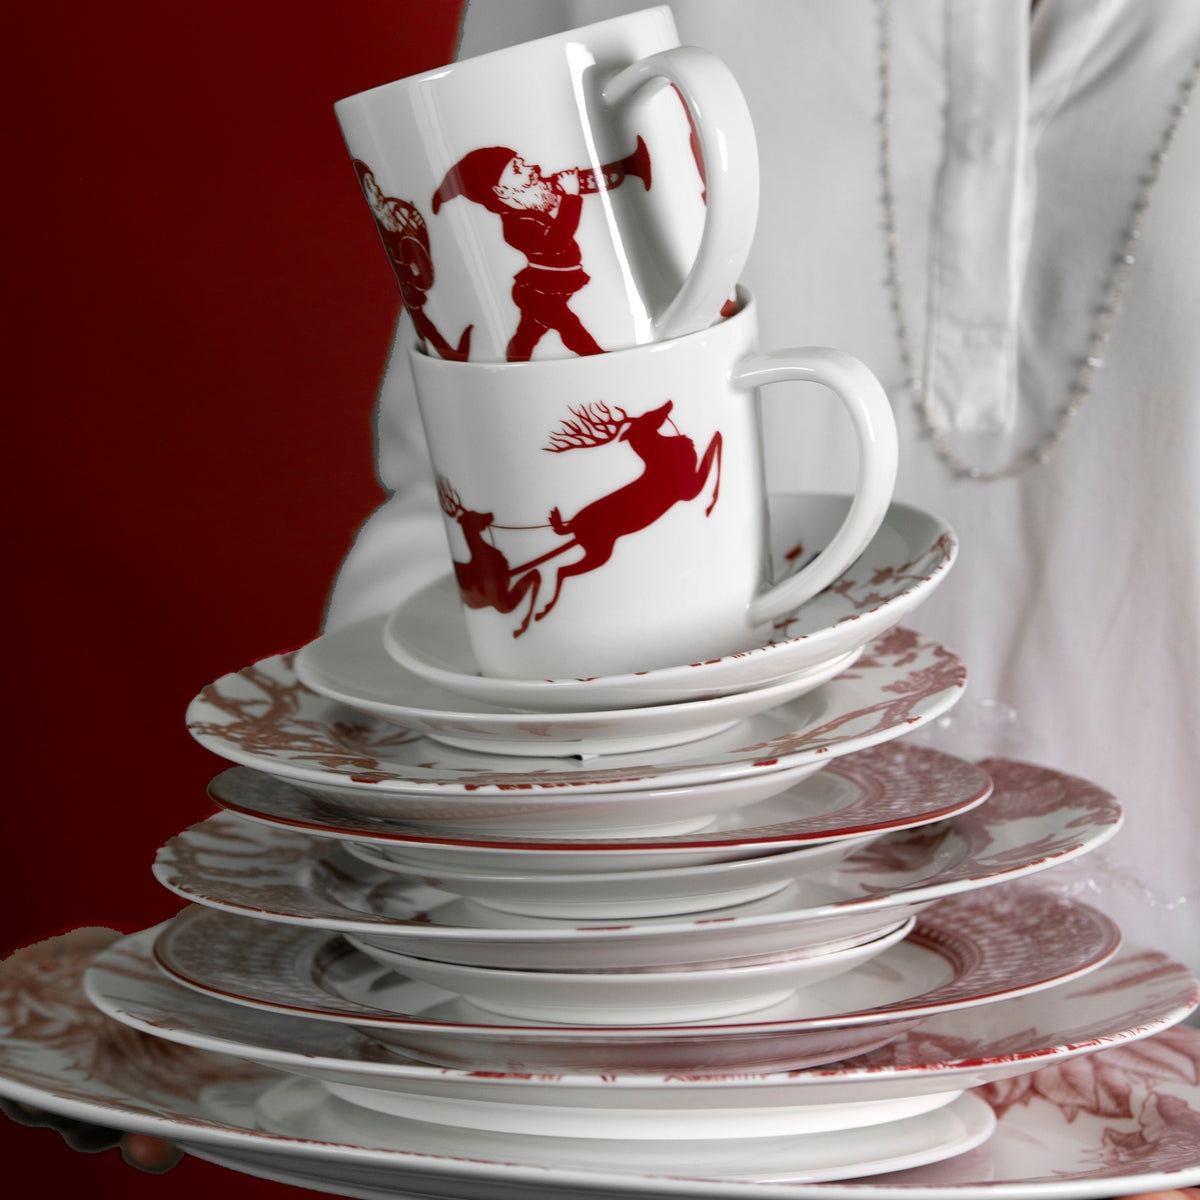 A woman holding a stack of Elves Mug Red plates for a holiday table, from the brand Caskata Artisanal Home.